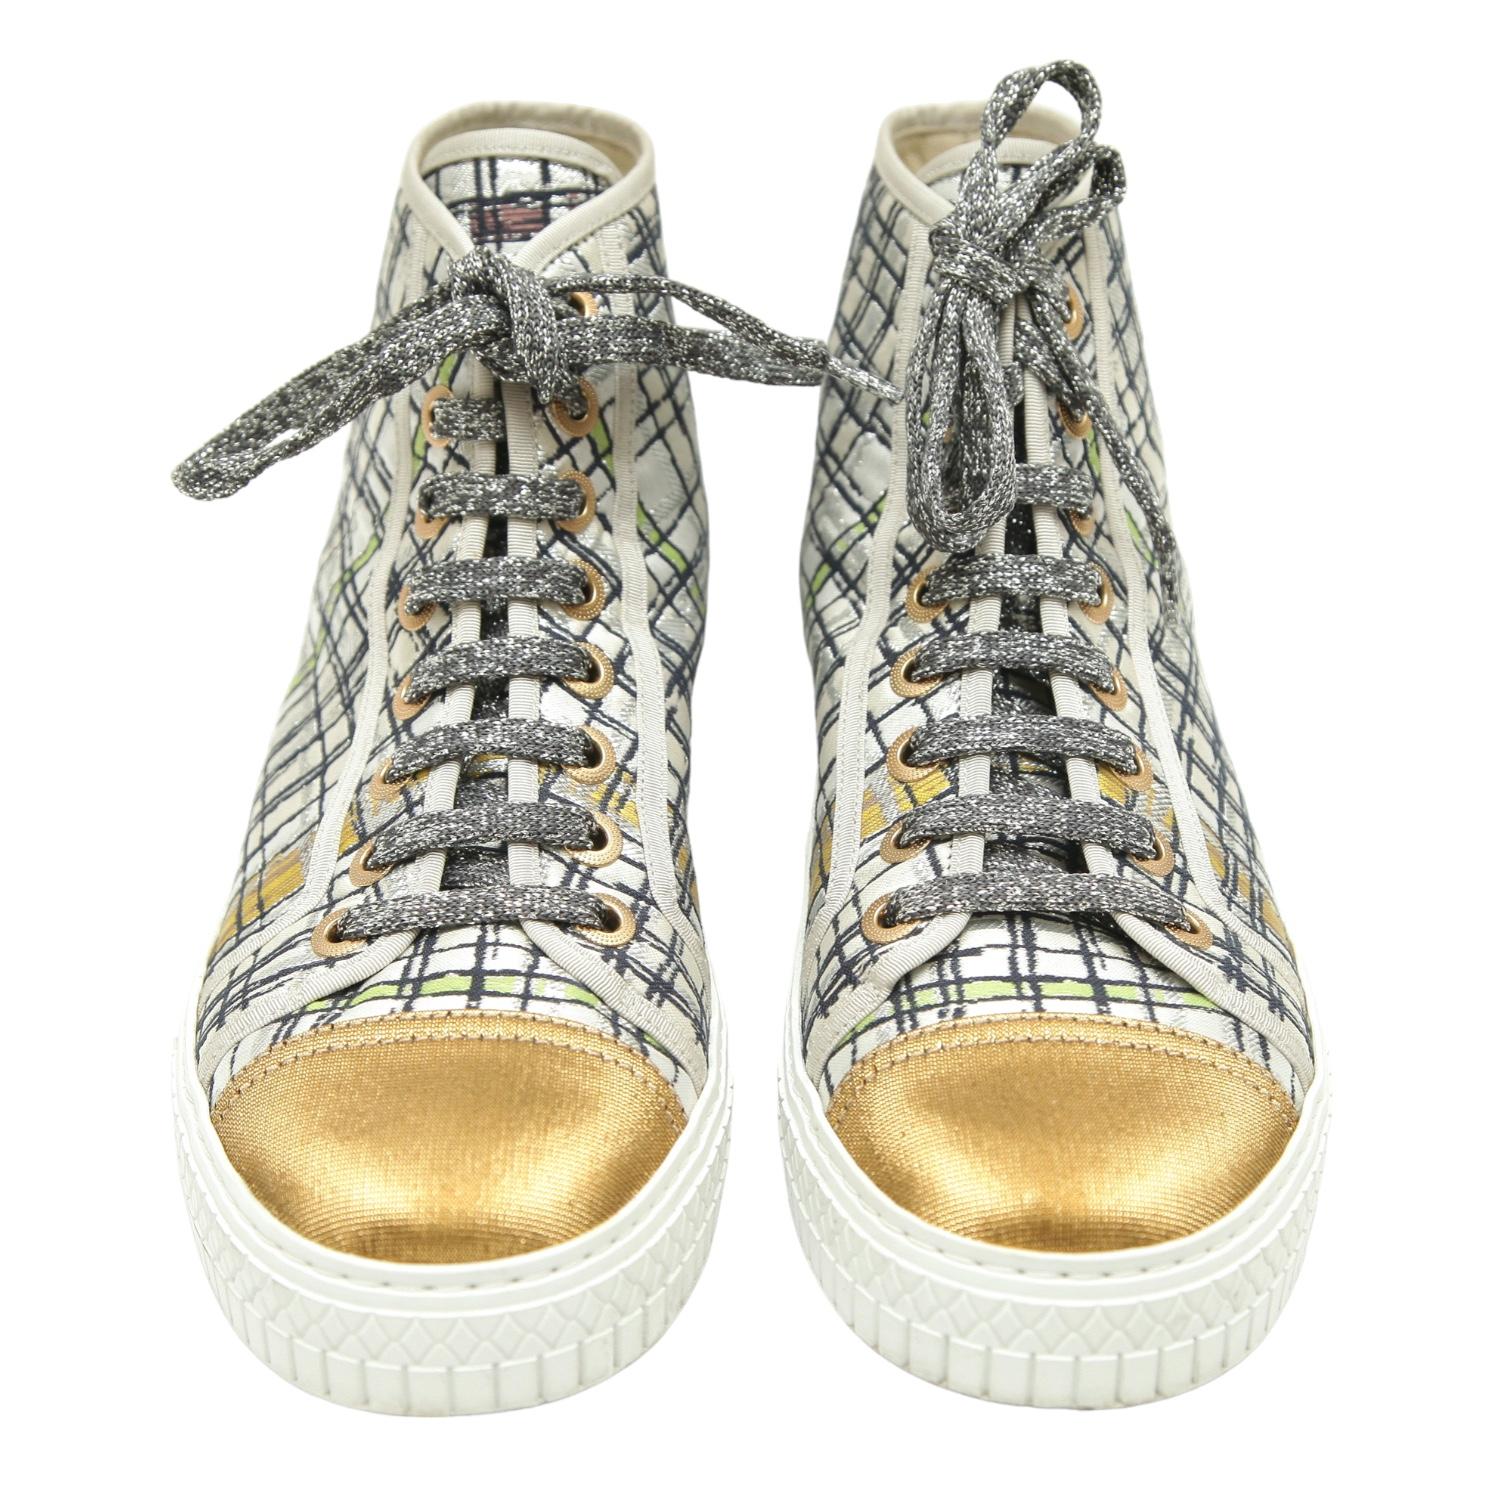 CHANEL Sneakers High Top Trainers Tweed Gold White Black Lace-Up Sz 39 17C 1